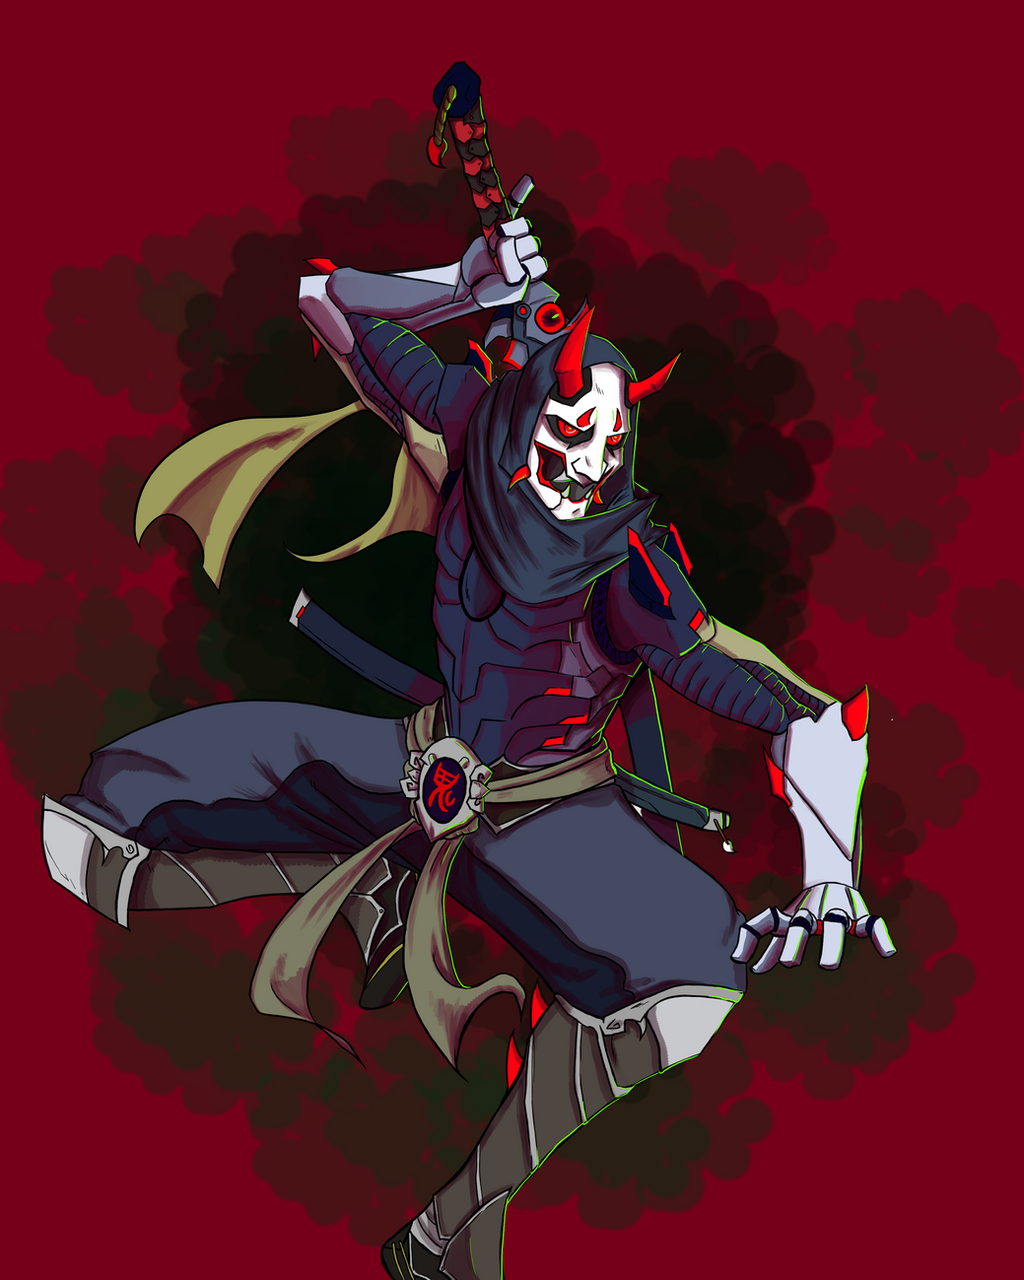 First ever edgy oni fanart. 